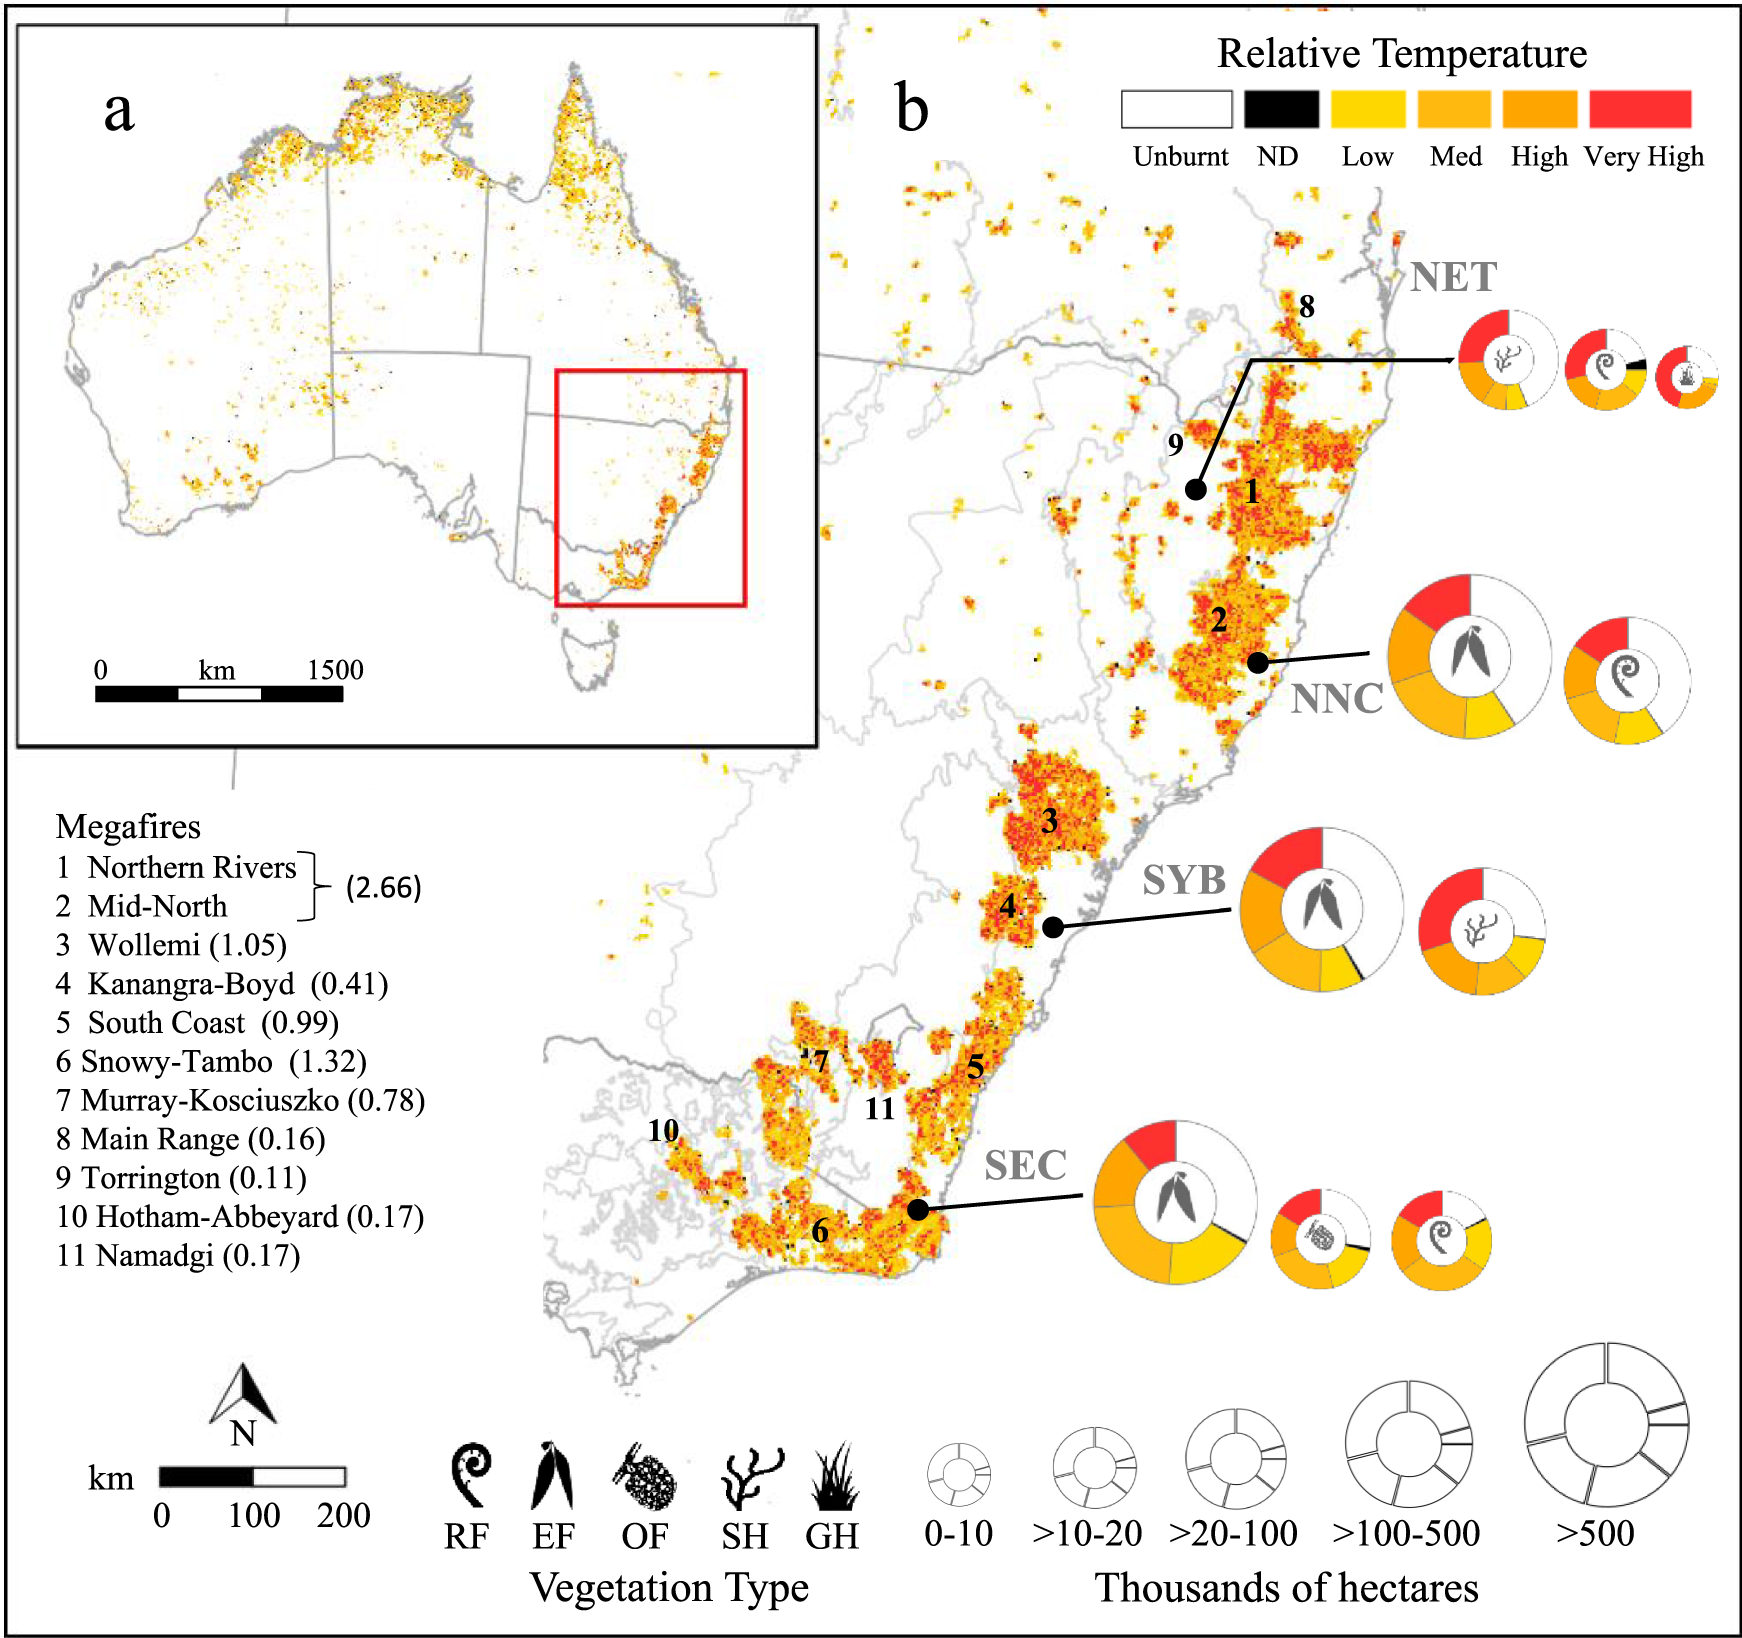 Implications Of The 2019 2020 Megafires For The Biogeography And Conservation Of Australian Vegetation Nature Communications